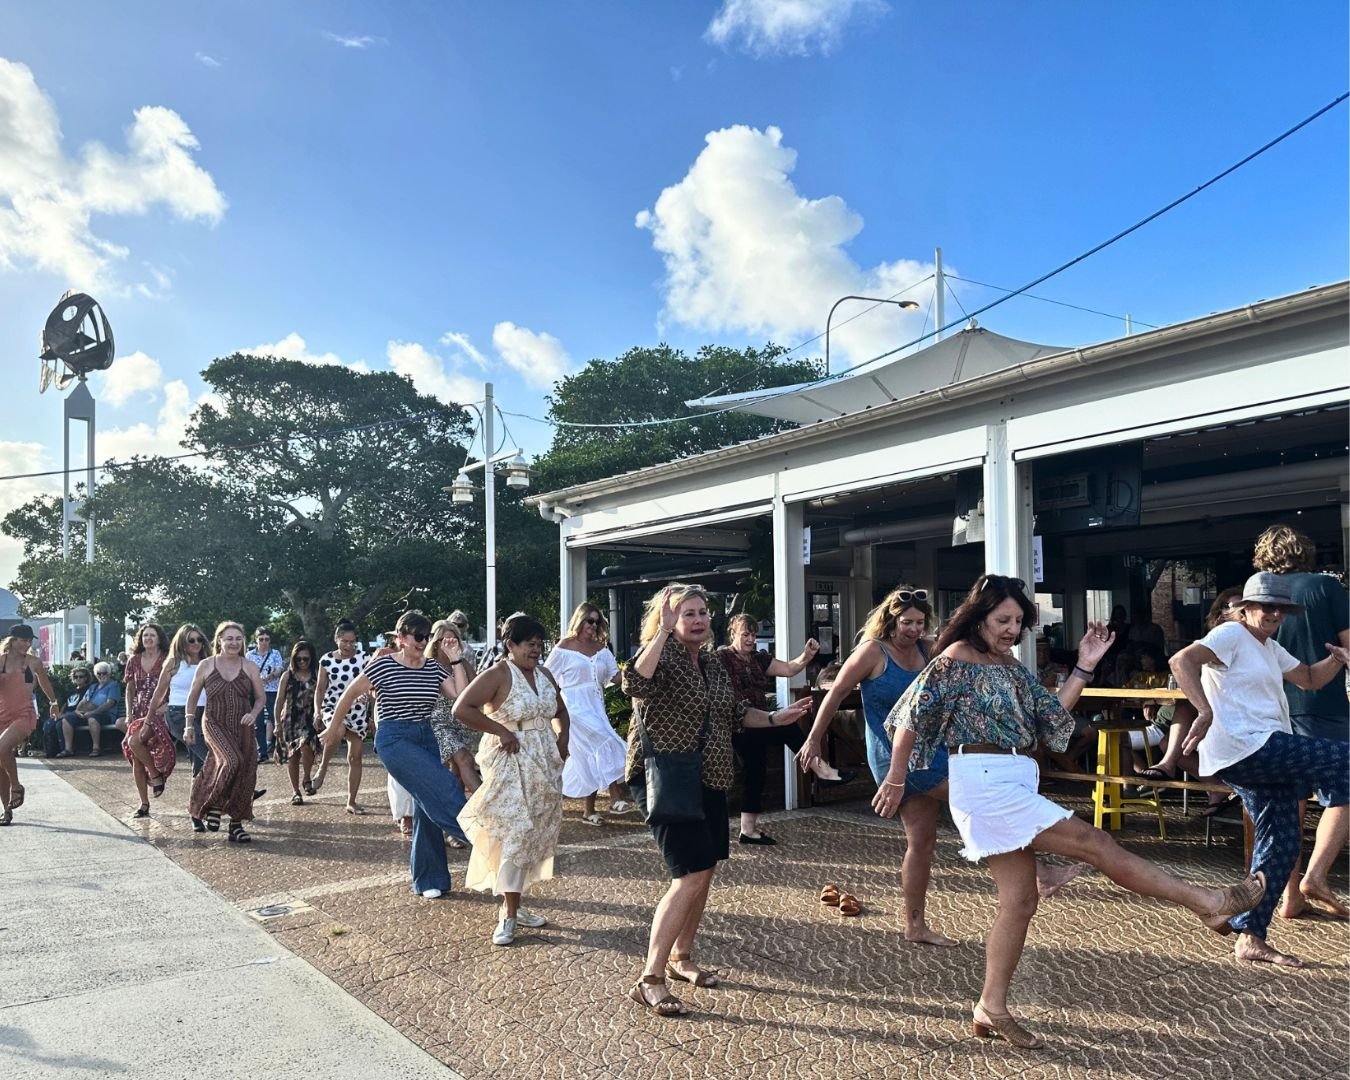 Are you ready for another FREE LIVE MUSIC EVENT ON THE WHARF? On June 9th EPIC with play directly on the Wharf at Fawcett Park from 3-6pm. 

Book your table and get more info online at https://www.wharfbarballina.com.au/book